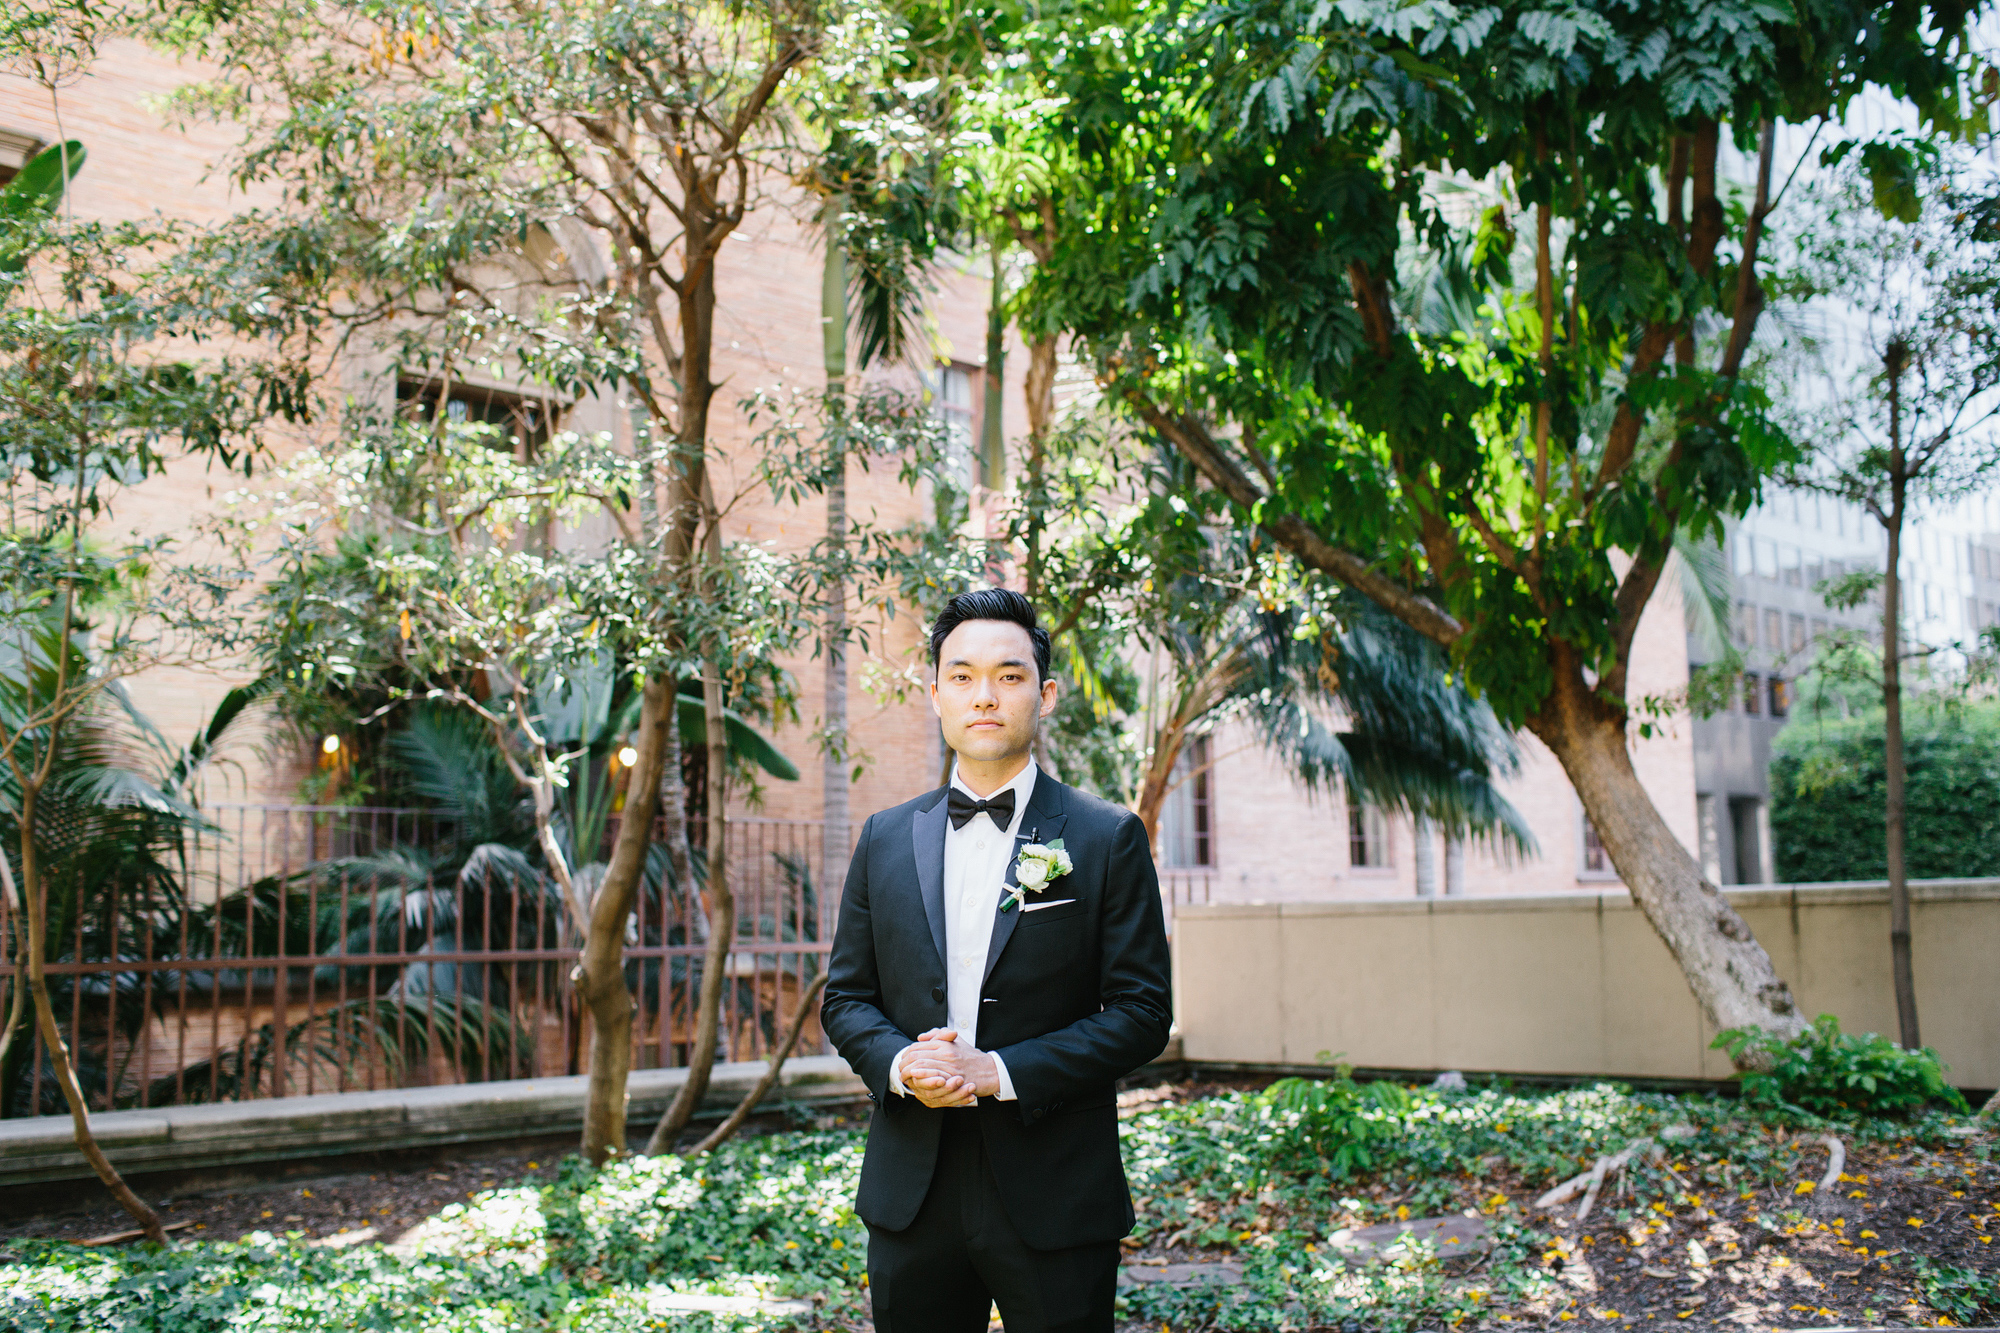 The groom wore a black bow tie. 